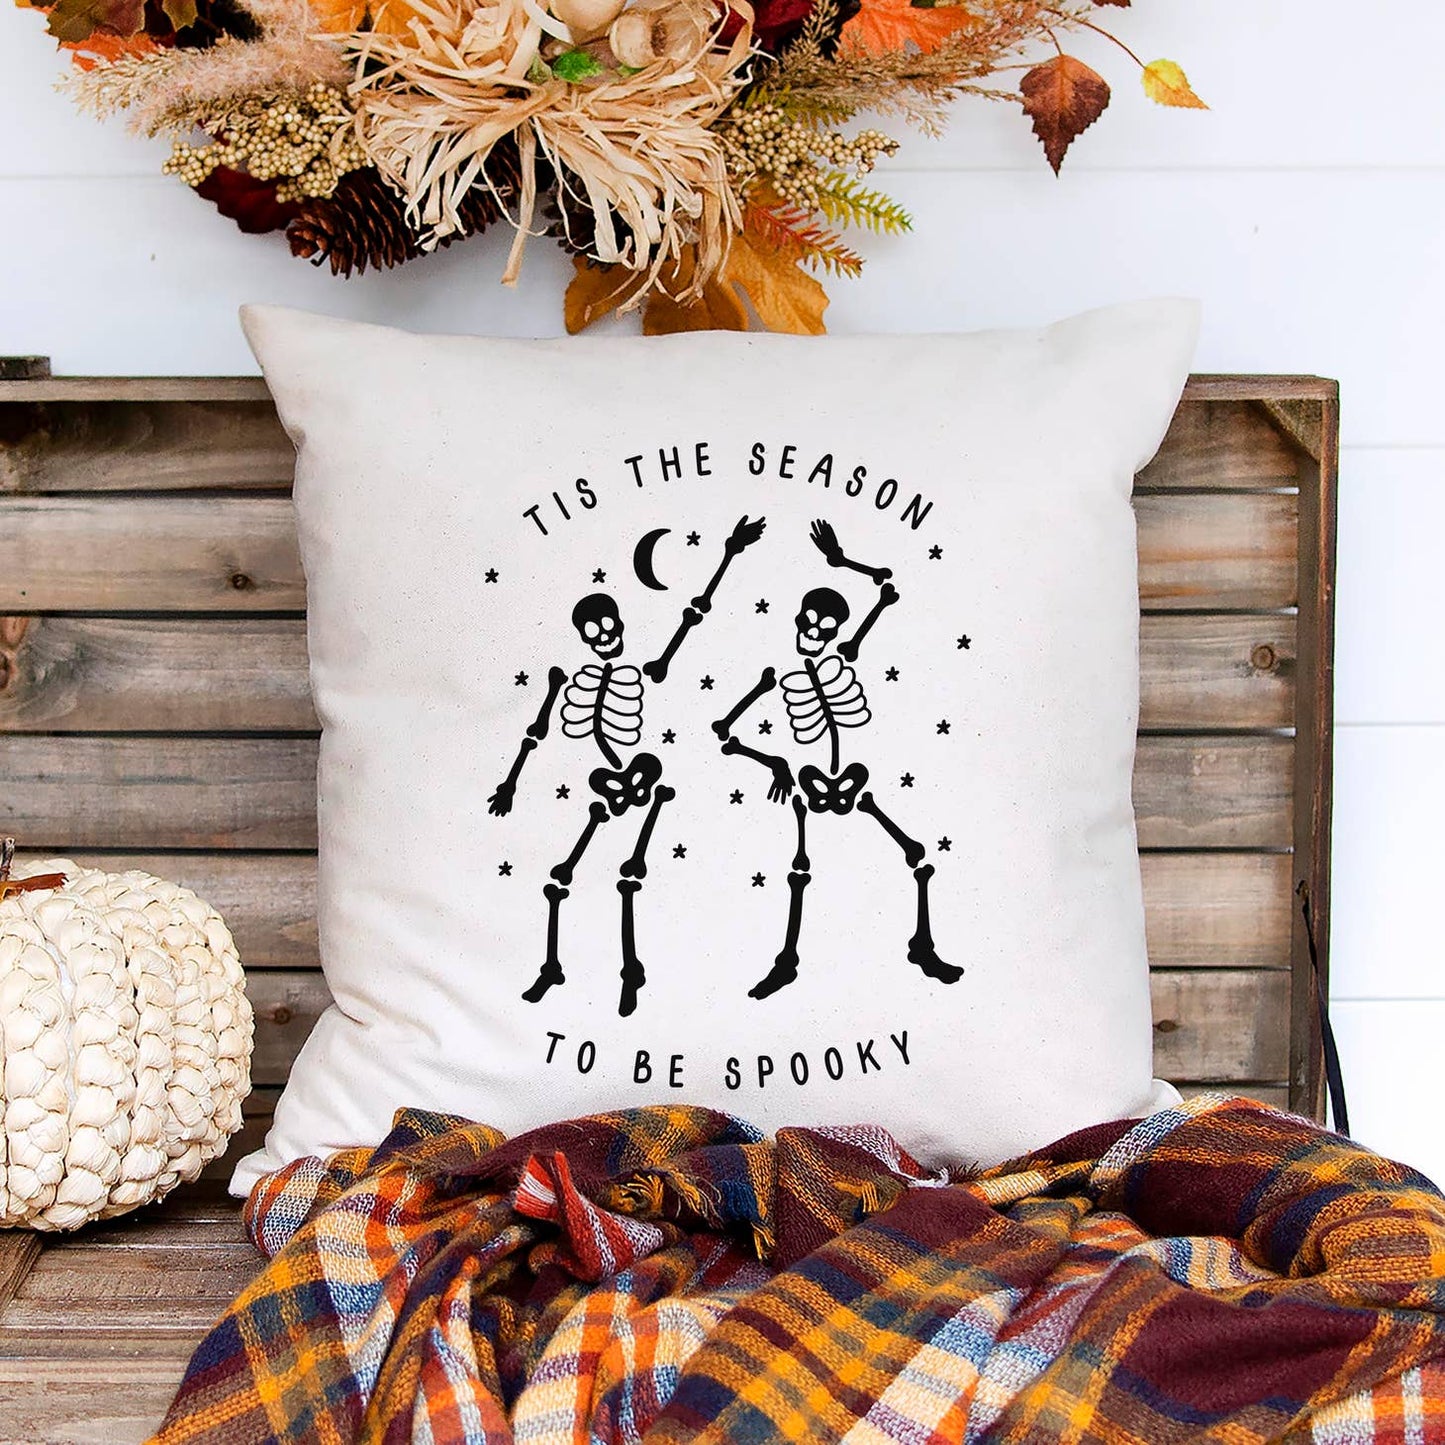 Tis the Season To Be Spooky Pillow Cover